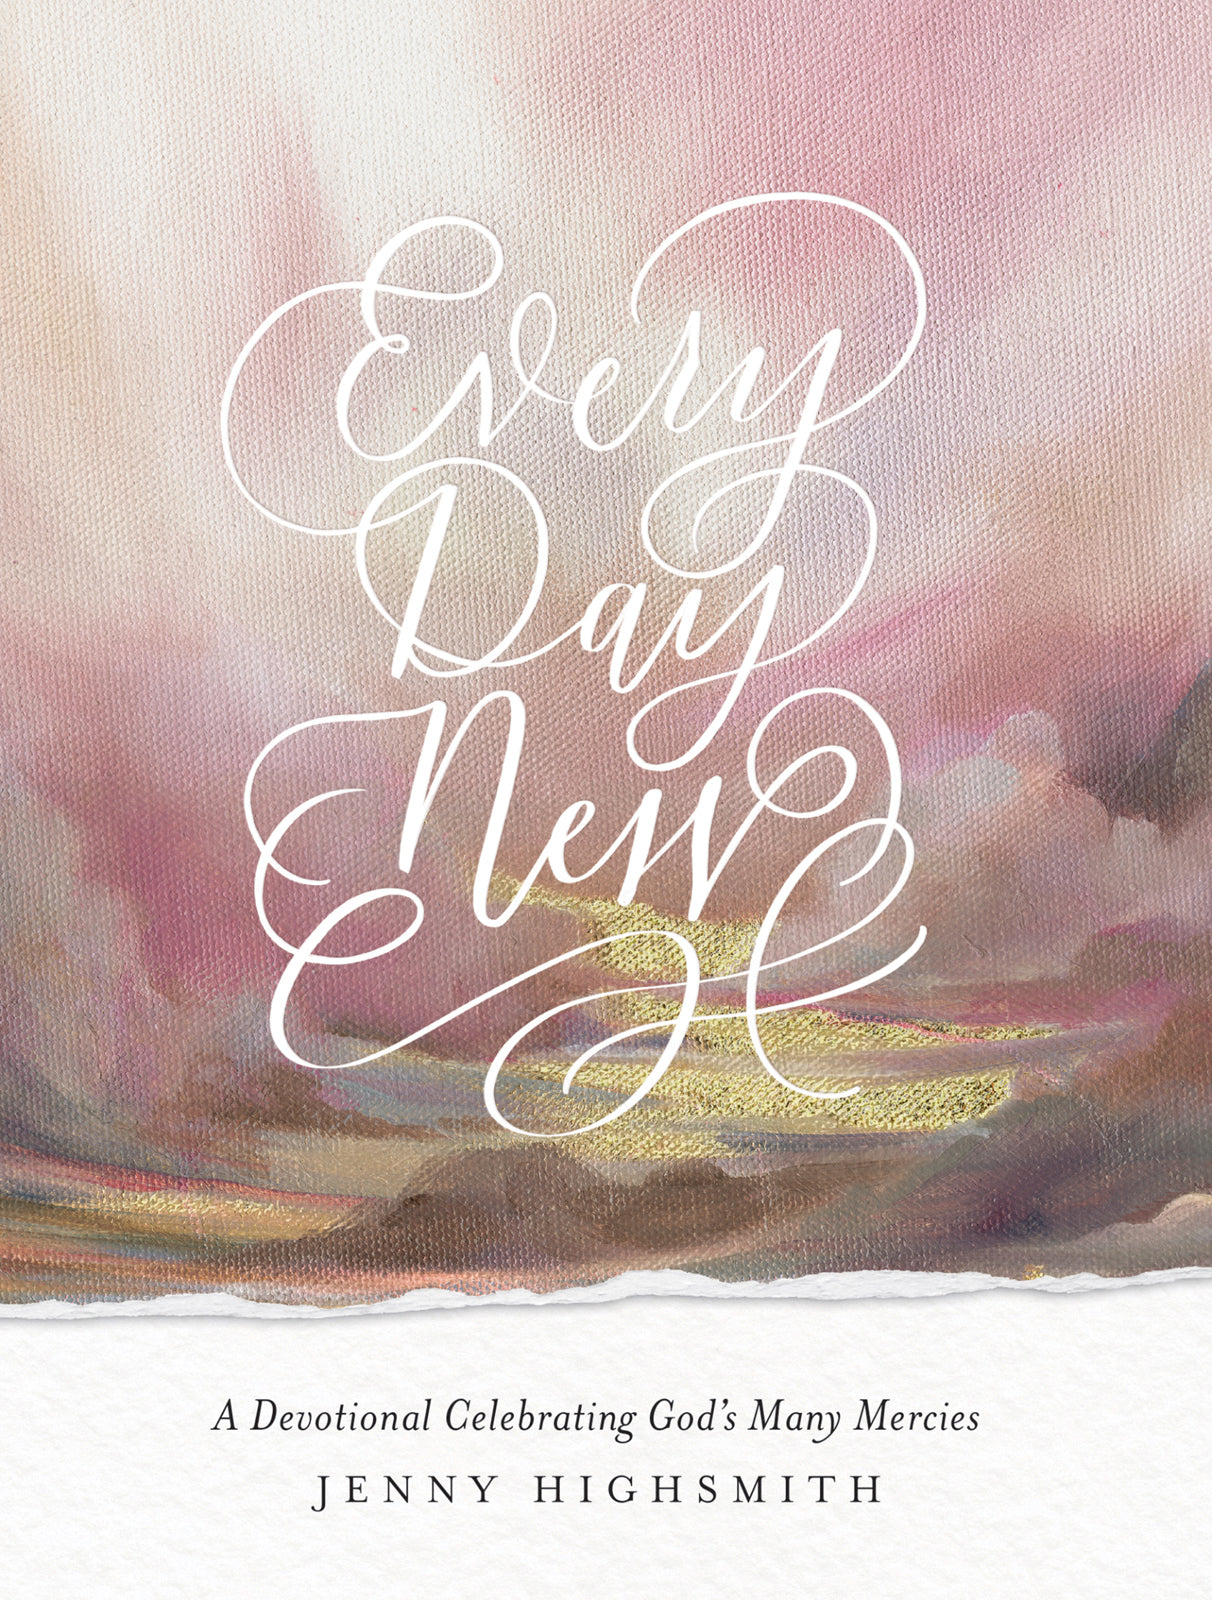 Every Day New Devotional